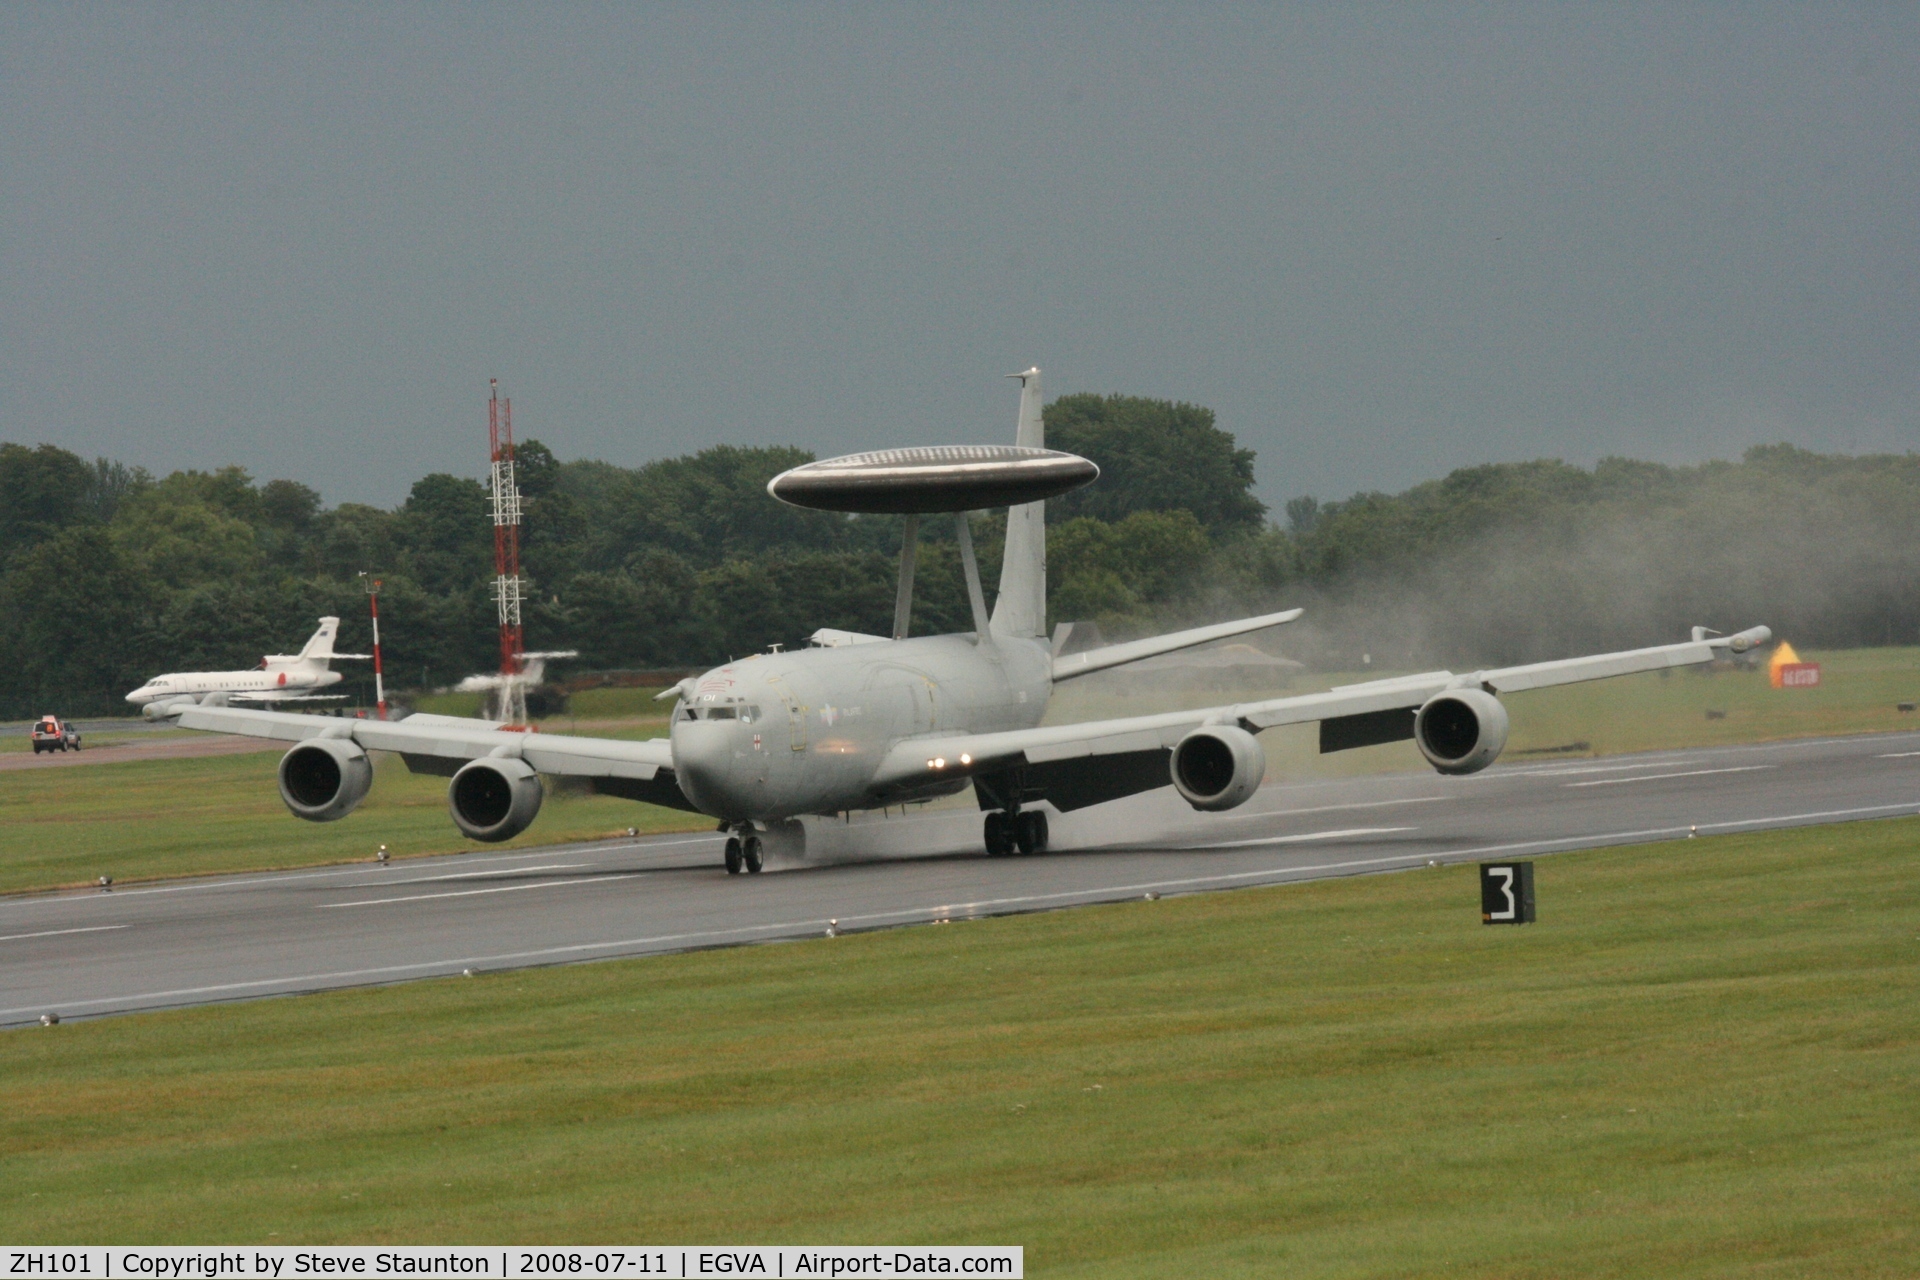 ZH101, 1989 Boeing E-3D Sentry AEW.1 C/N 24109, Taken at the Royal International Air Tattoo 2008 during arrivals and departures (show days cancelled due to bad weather)